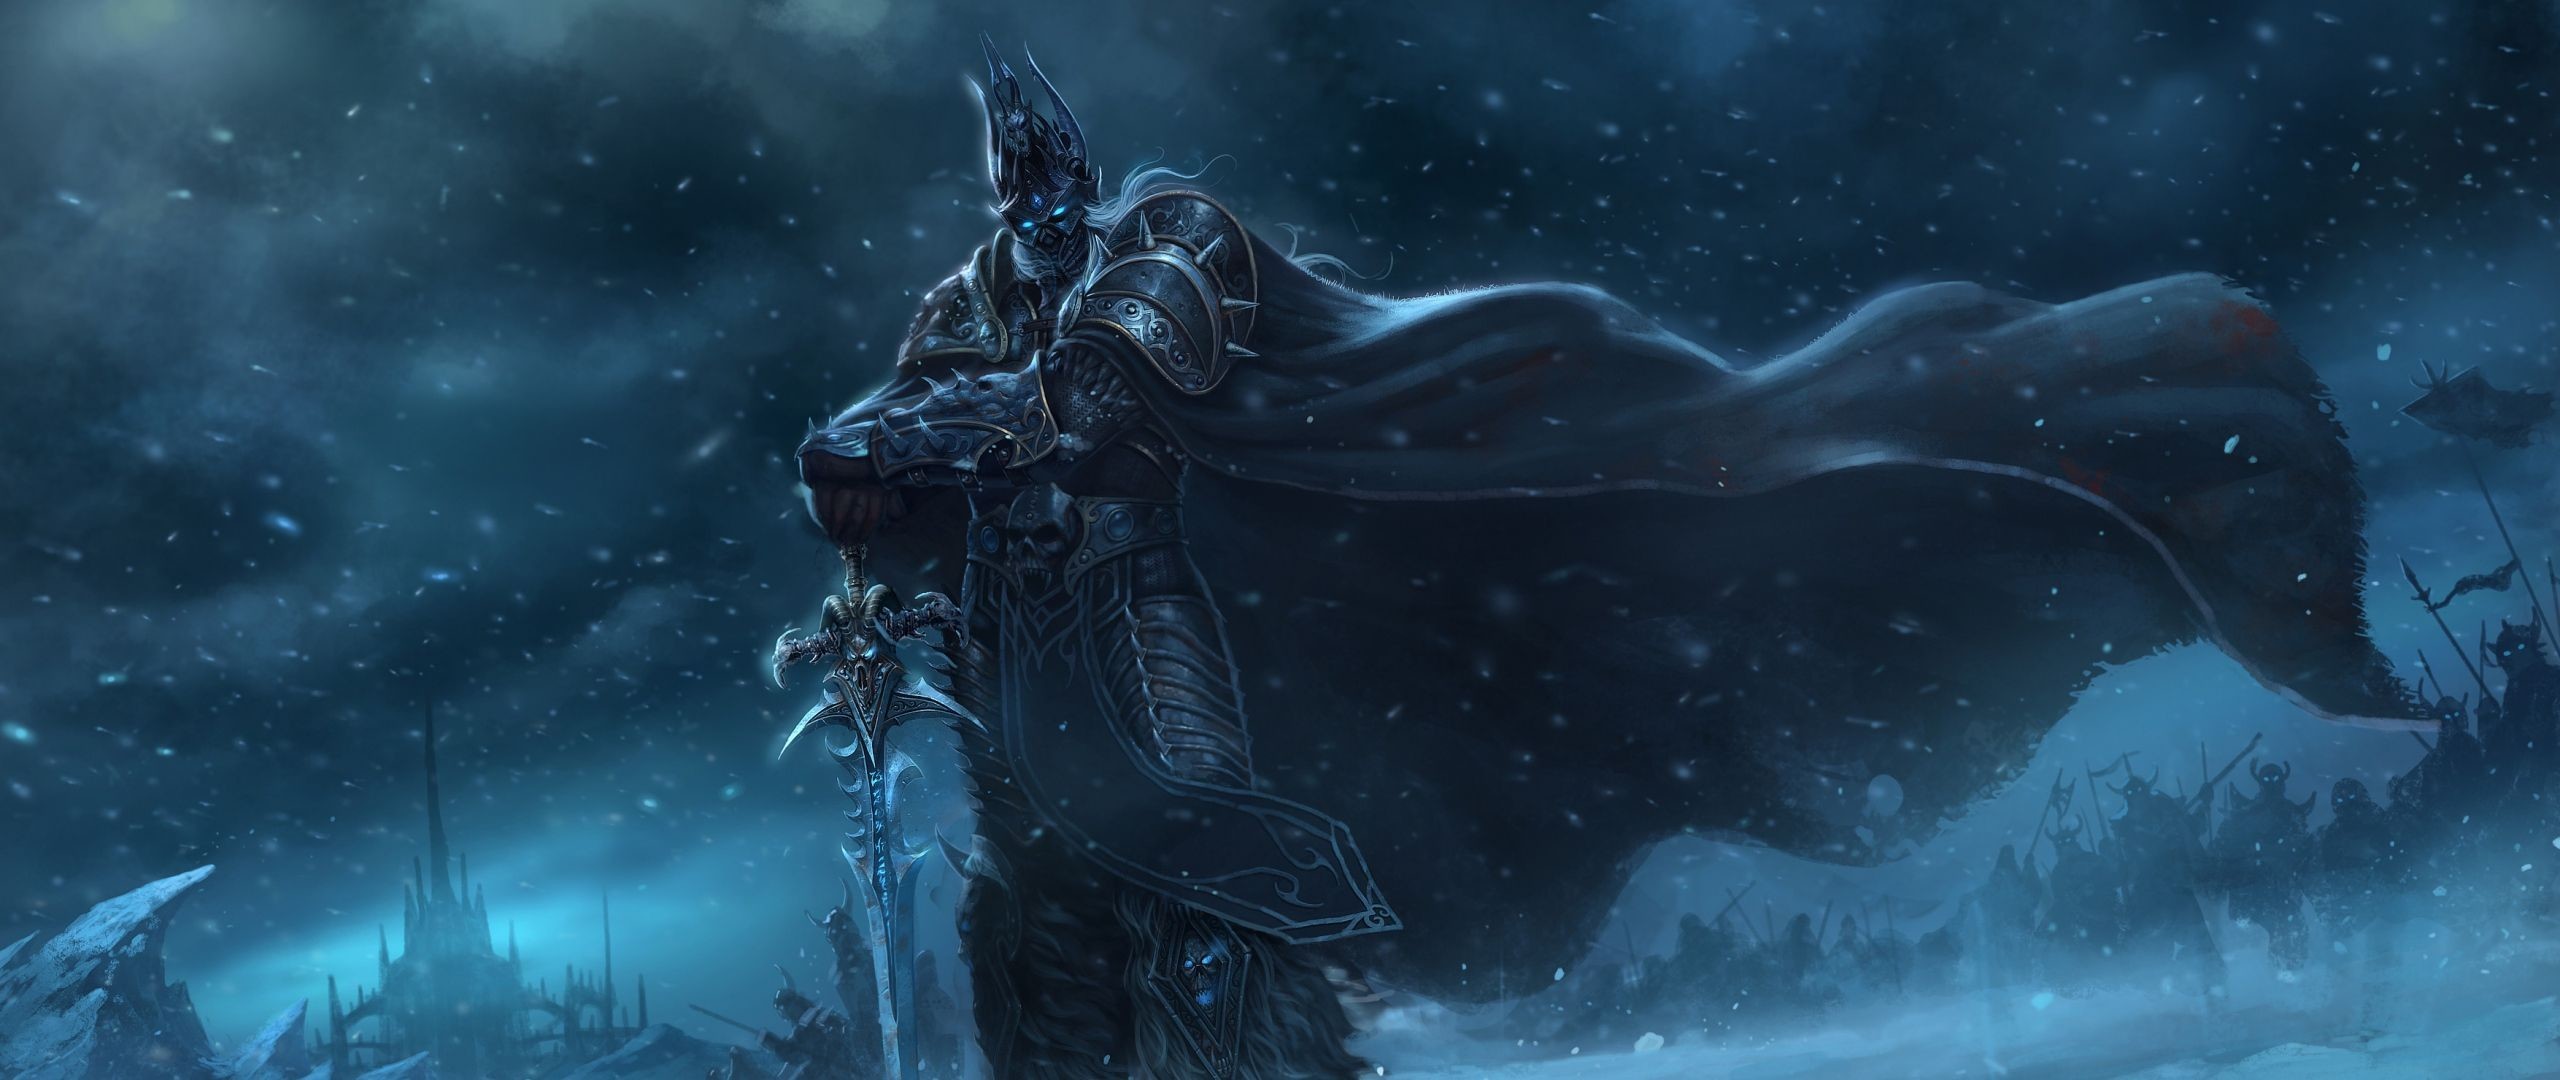 2560x1080 Page 4:  21:9 TV World of warcraft Wallpapers HD, Desktop .